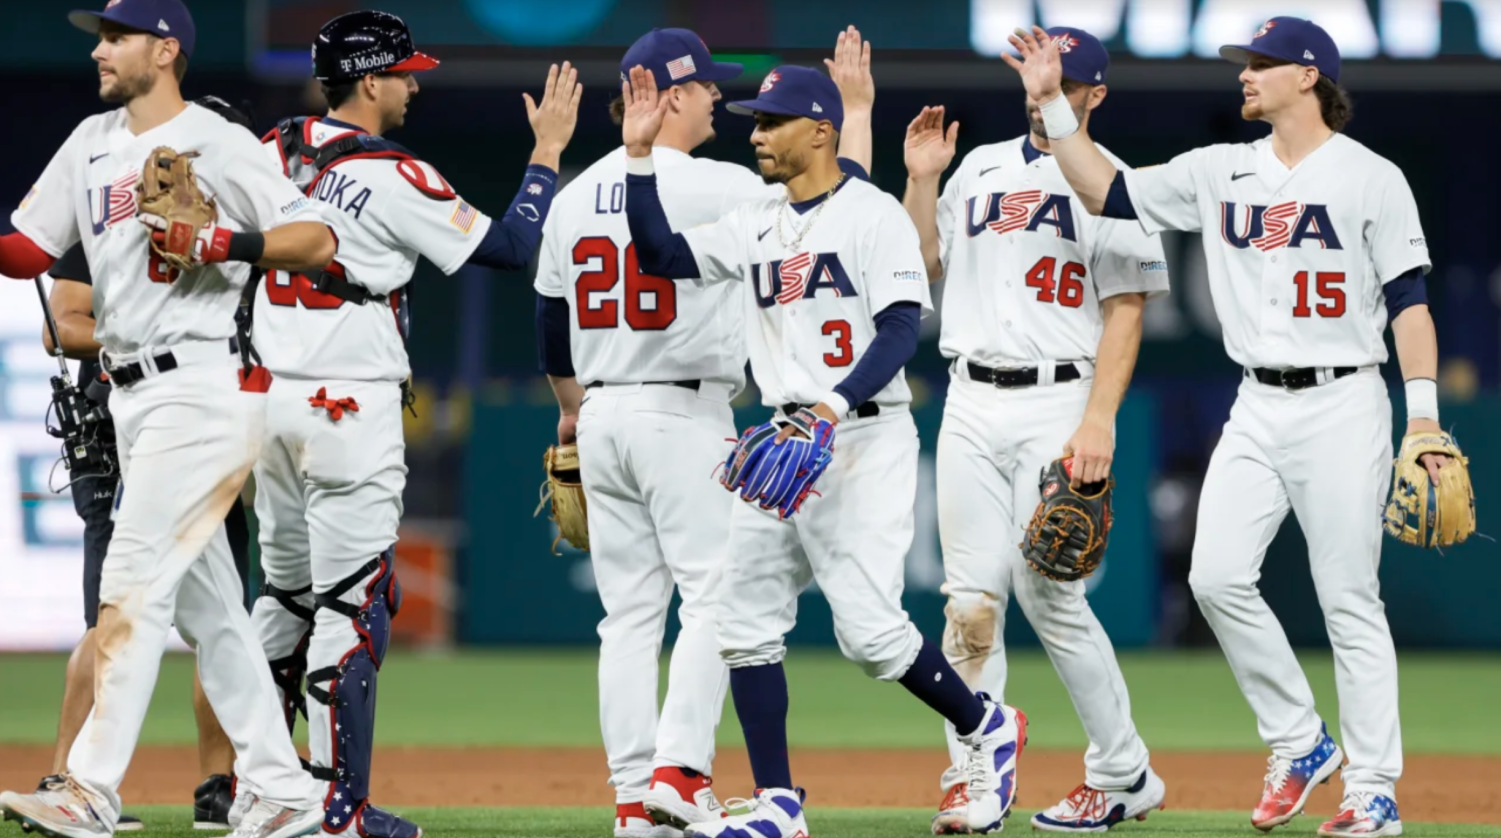 Angels' Mike Trout was catalyst for Team USA's World Baseball